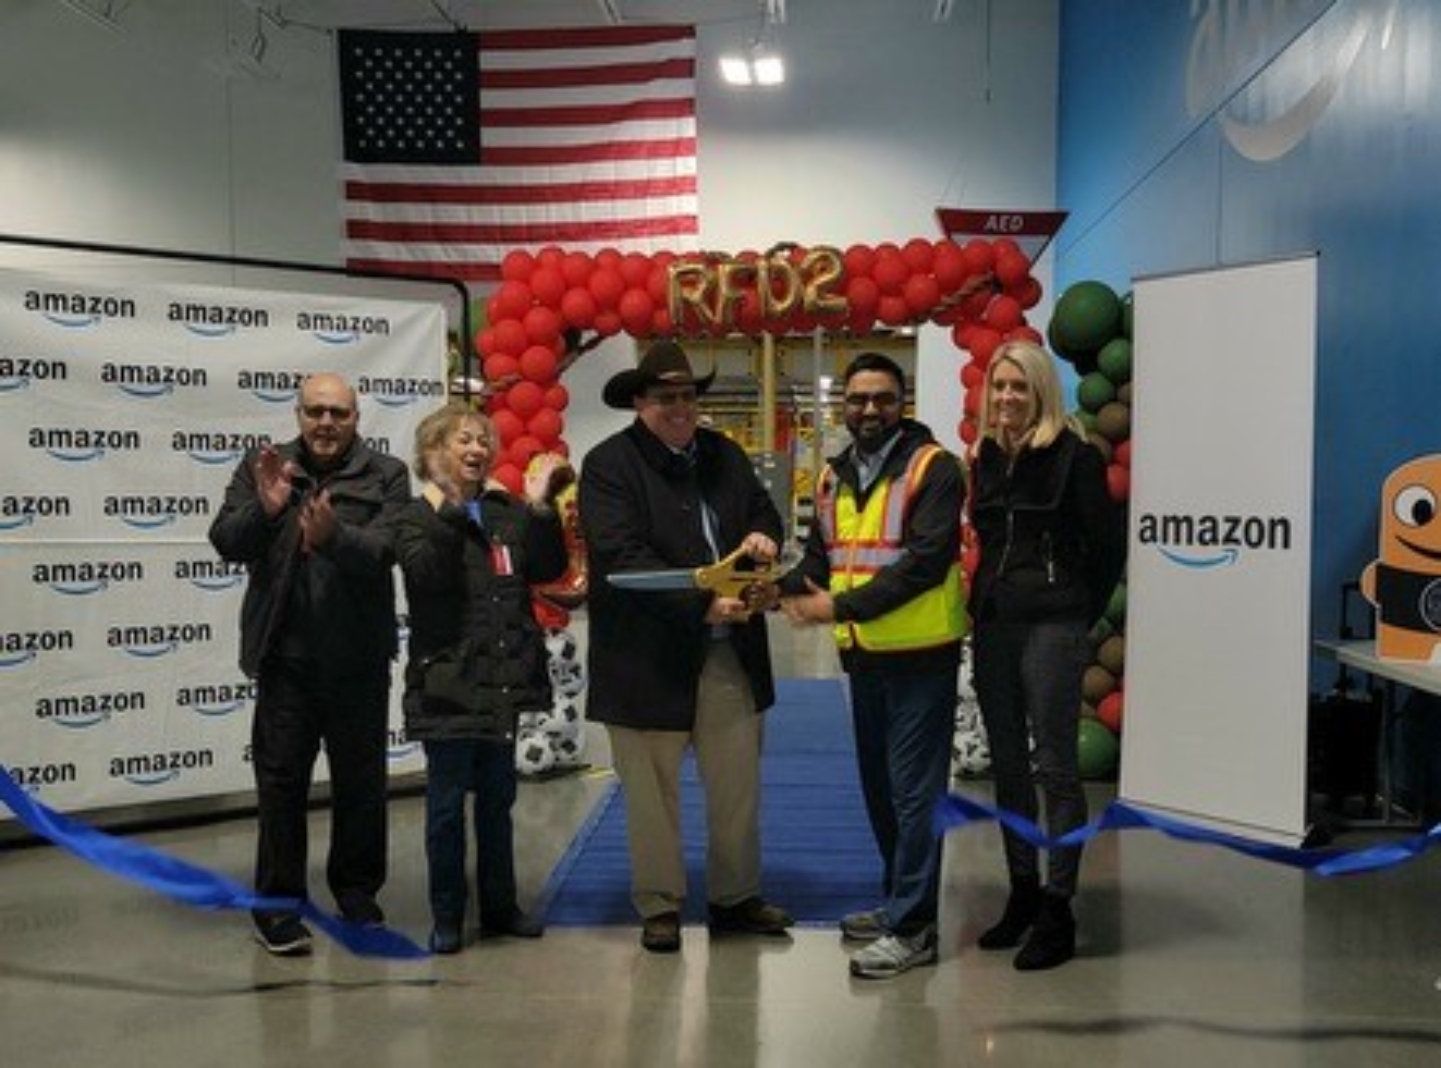 From Left to Right: Trustee Vito Benigno, Trustee Ronda Goldman, Village President Tim Hoeft, Amazon Receive Center General Manager Taseen Mohammed, and Executive Director for the Huntley Area Chamber of Commerce Nancy Binger